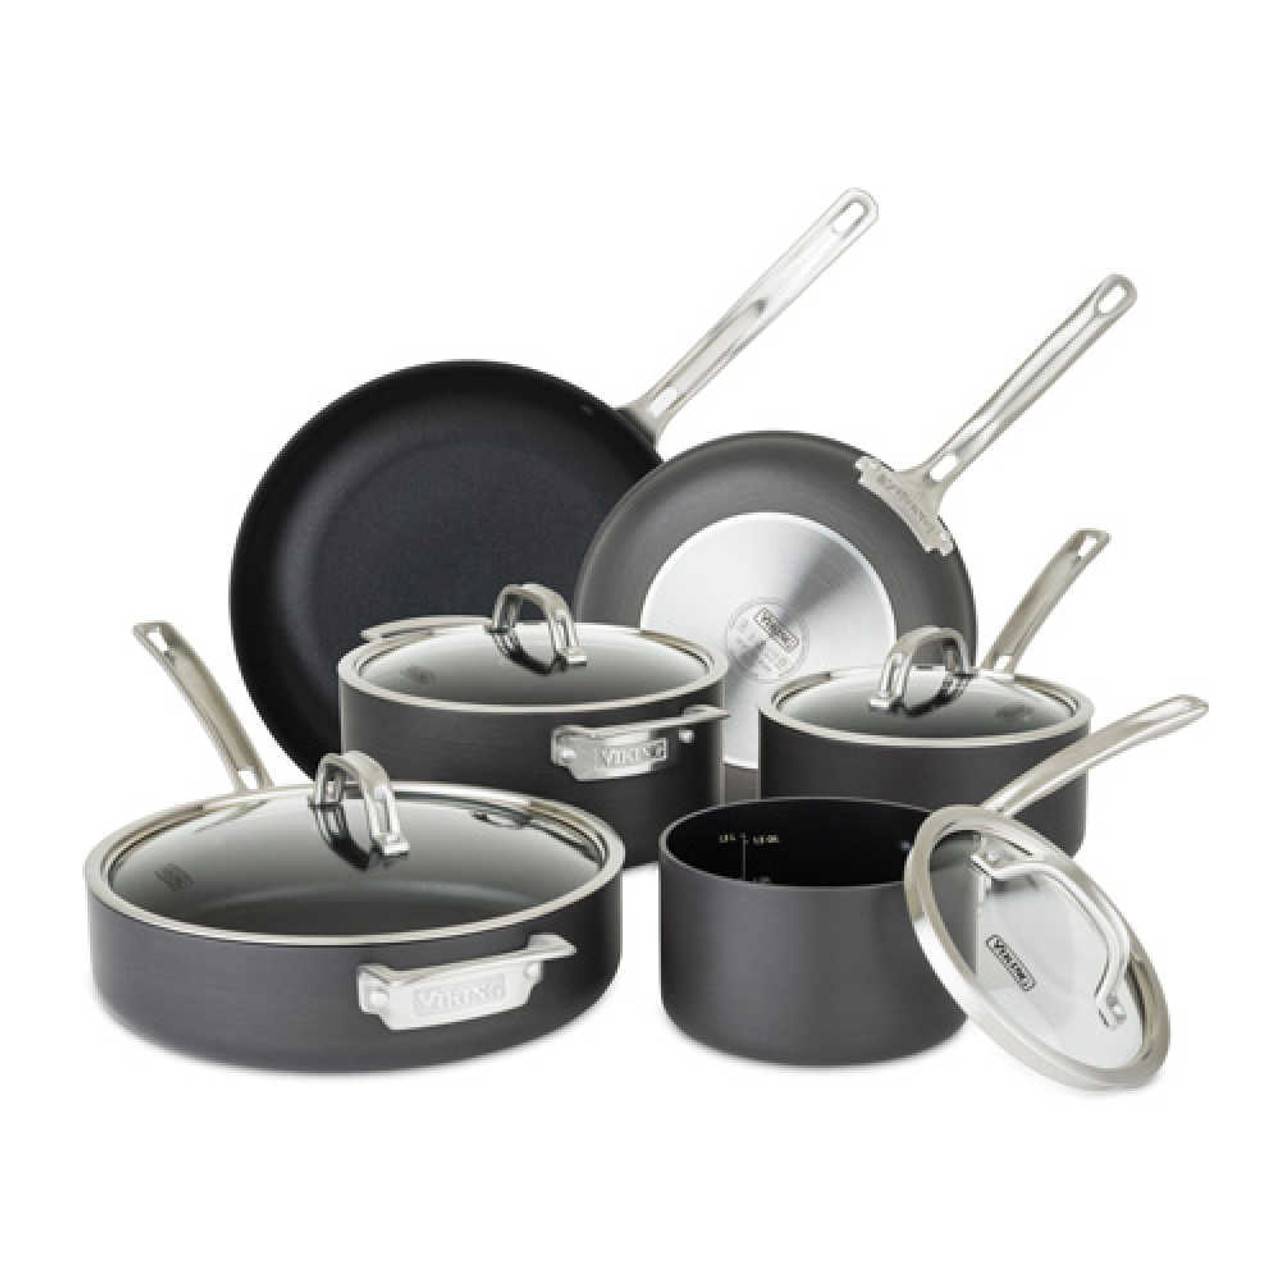 https://cdn11.bigcommerce.com/s-hccytny0od/images/stencil/1280x1280/products/4823/19661/Viking_Hard_Anodized_Nonstick_10-Piece_Cookware_Set__55410.1656020772.jpg?c=2?imbypass=on